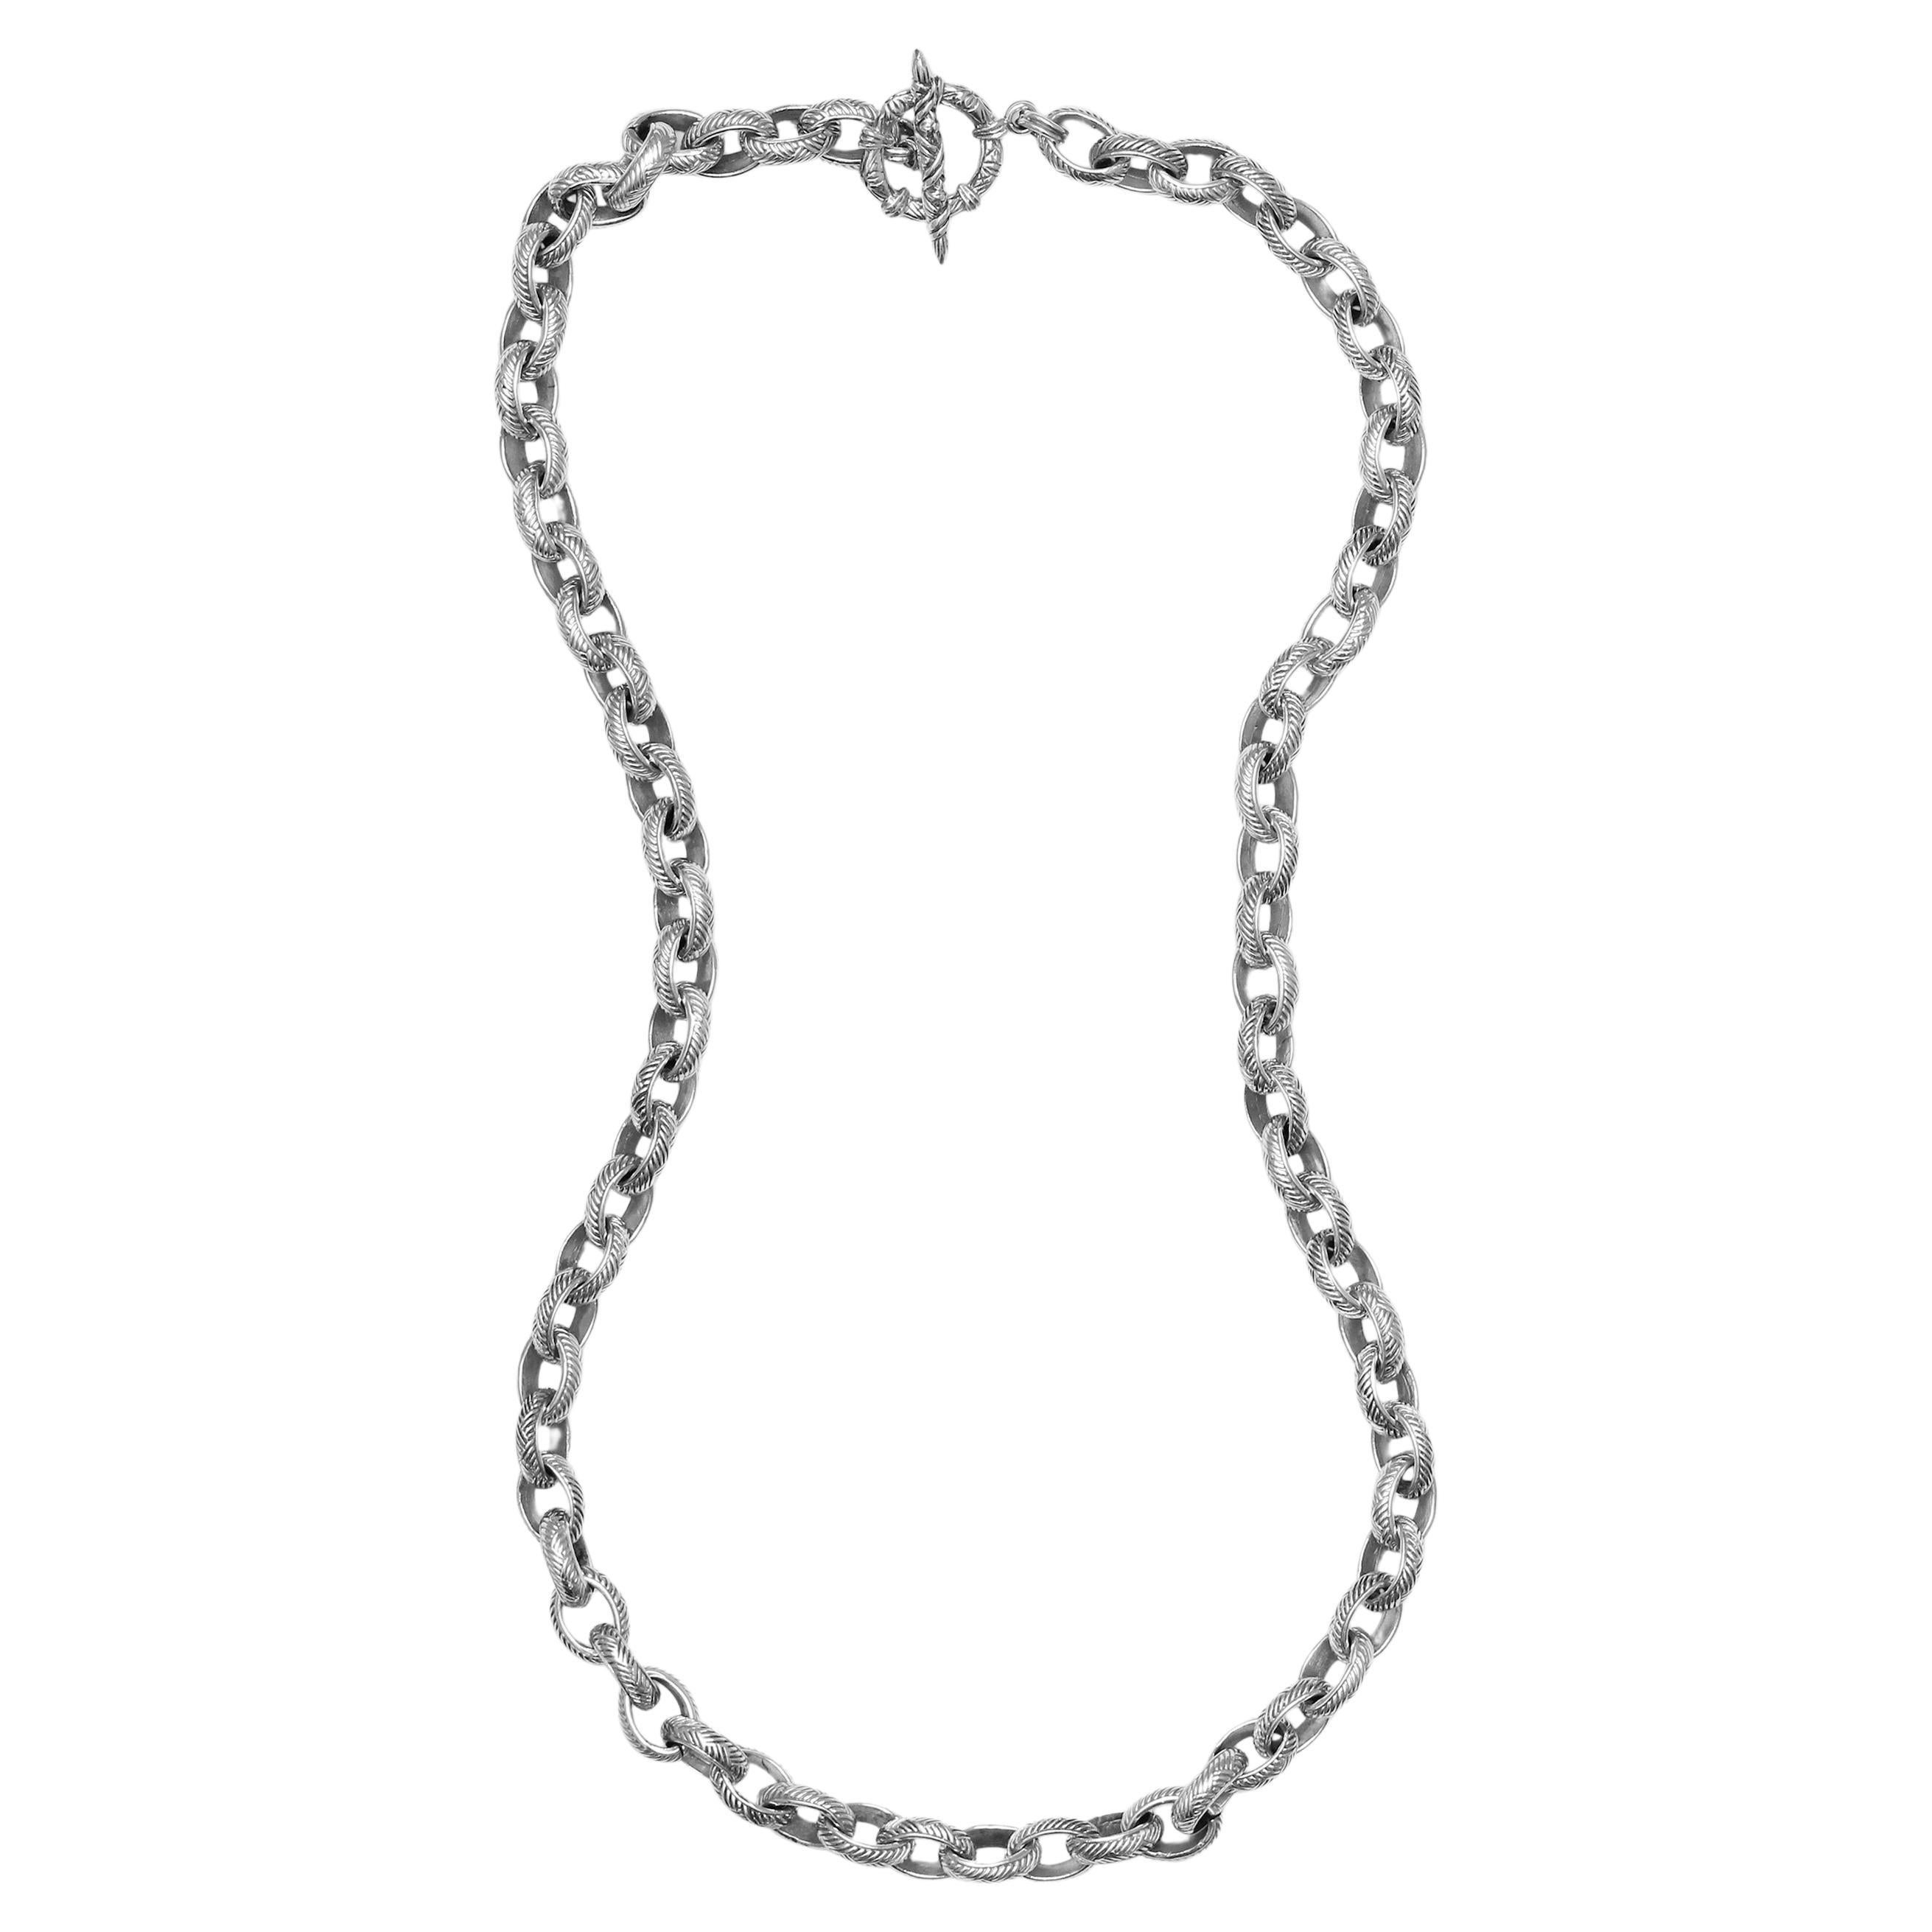 Signature Engraved Weave Linked Sterling Silver Chain Necklace